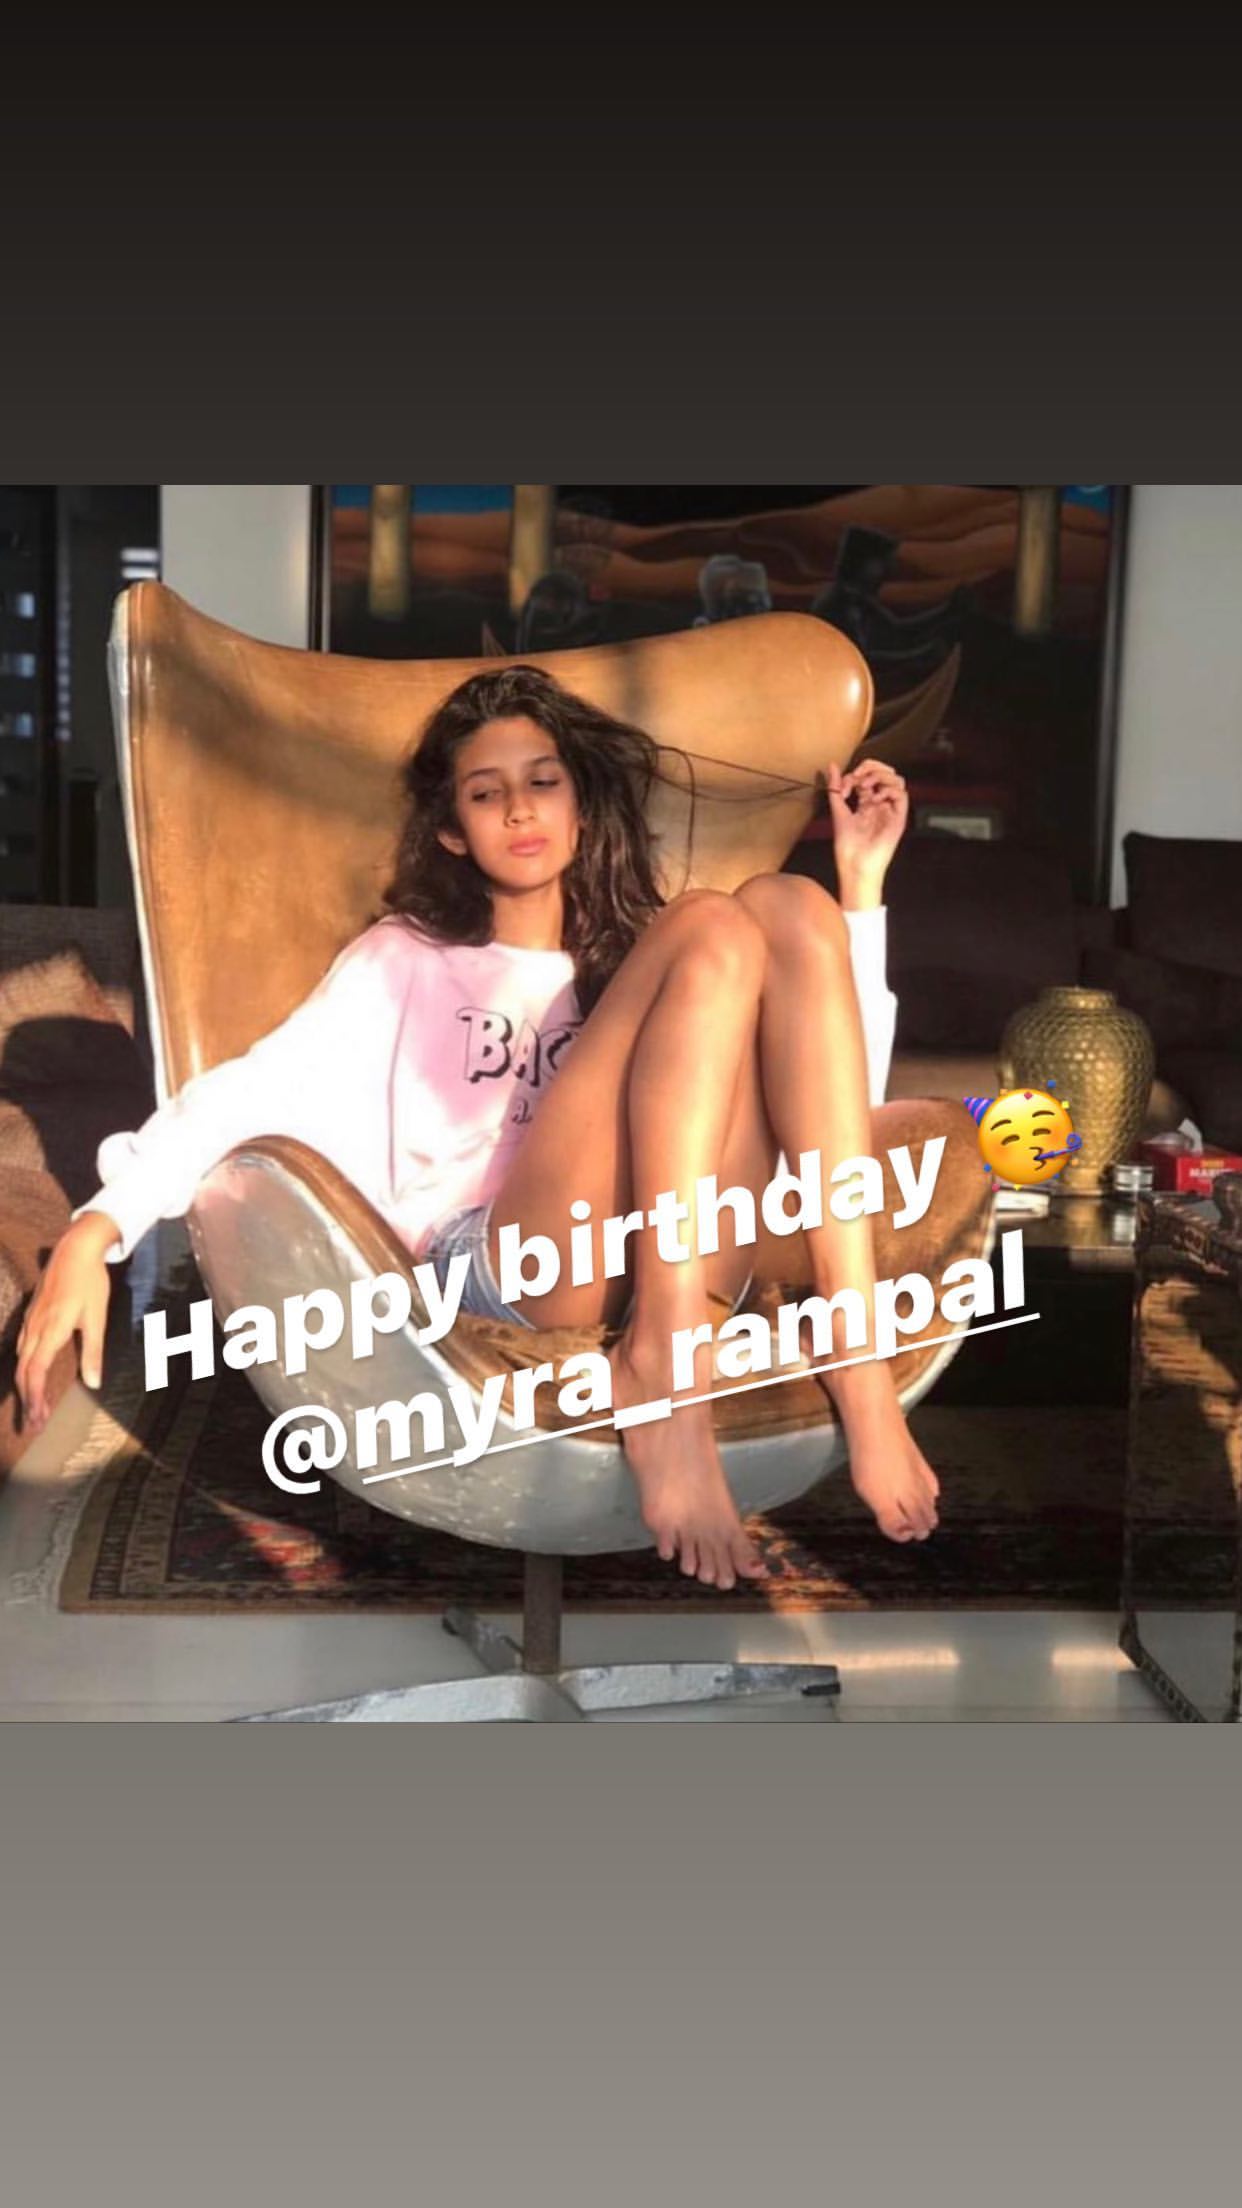 Arjun Rampal Shares Heartfelt Post For Daughter Myra On Her Birthday; GF Gabriella Is All Hearts For Their PIC